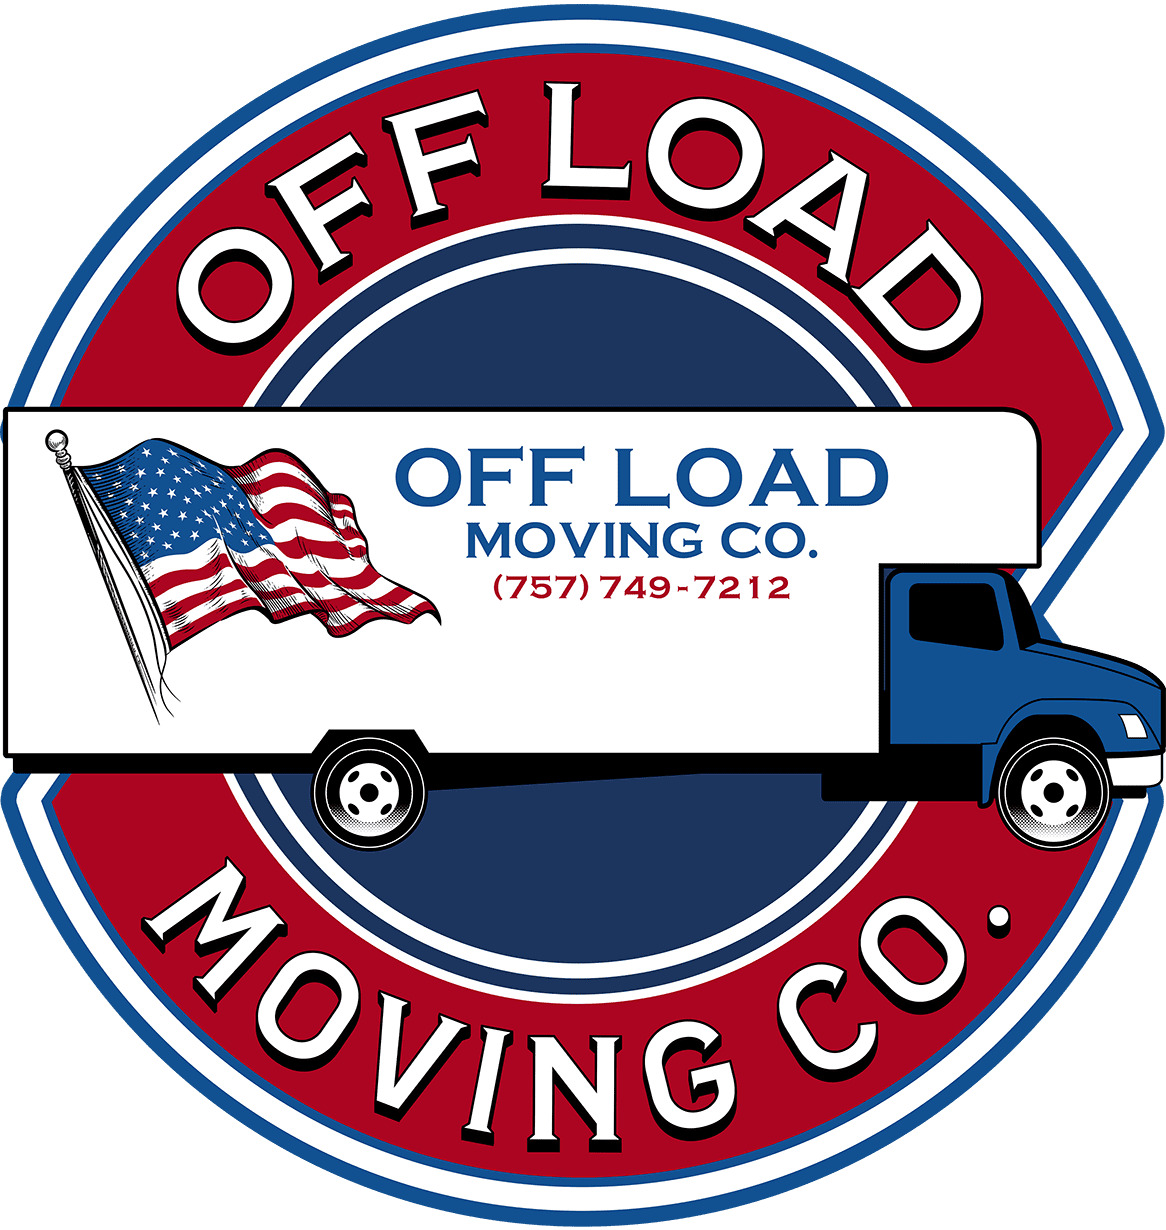 Off-Load Moving provides comprehensive and reliable moving services across Chesapeake, Norfolk, and Virginia Beach.